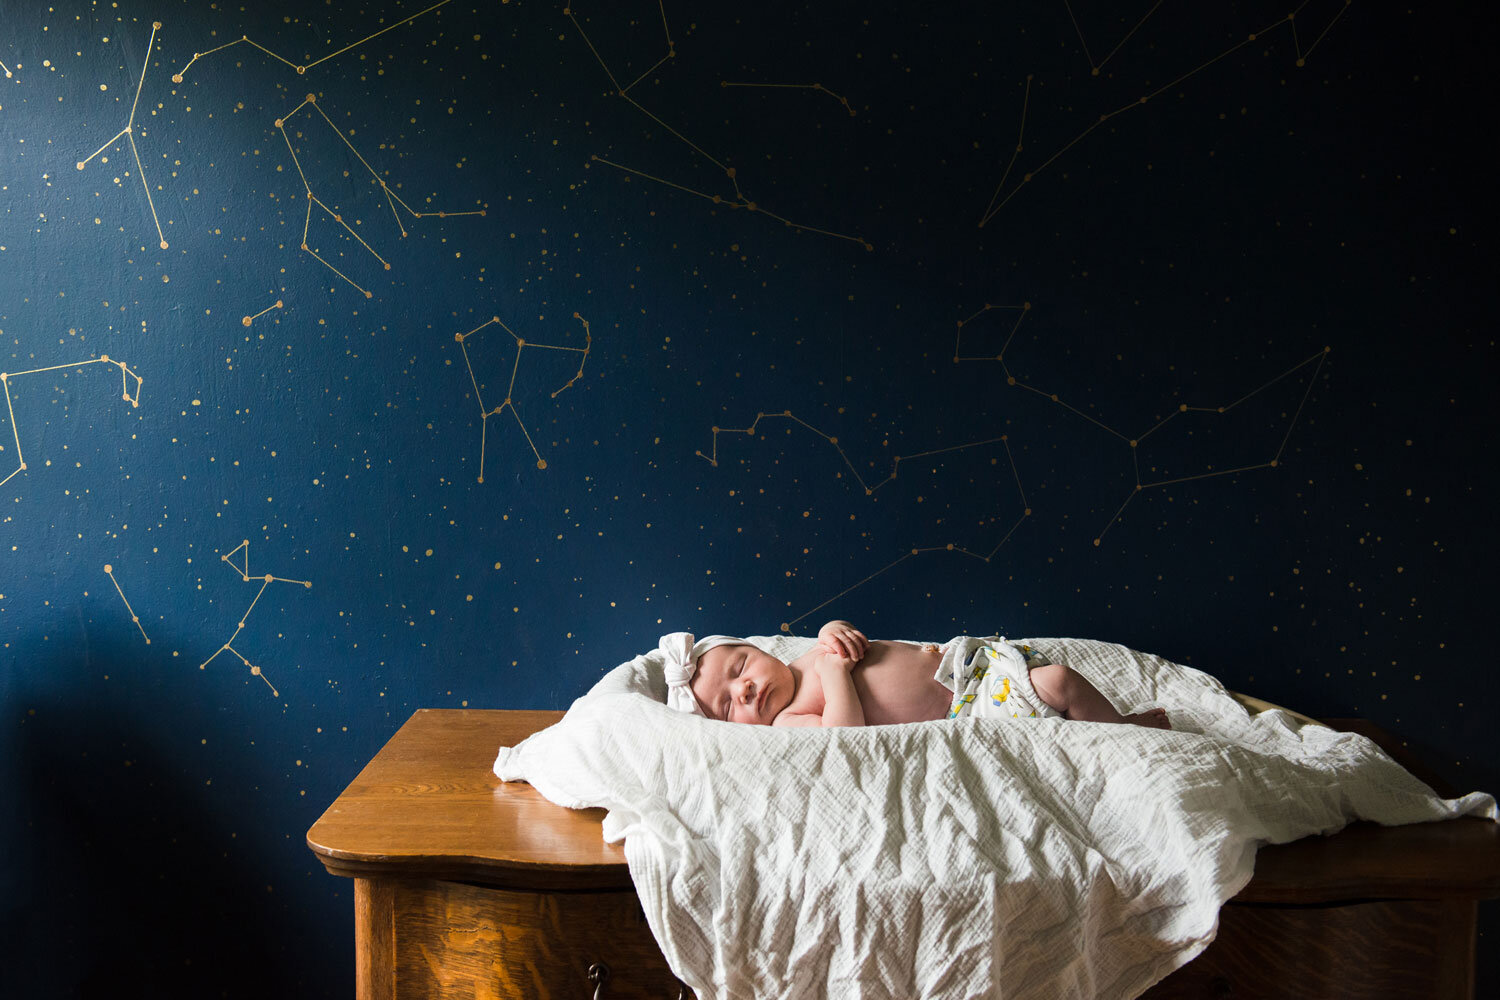 little newborn resting in a bed with a constellation painted on the wall behind